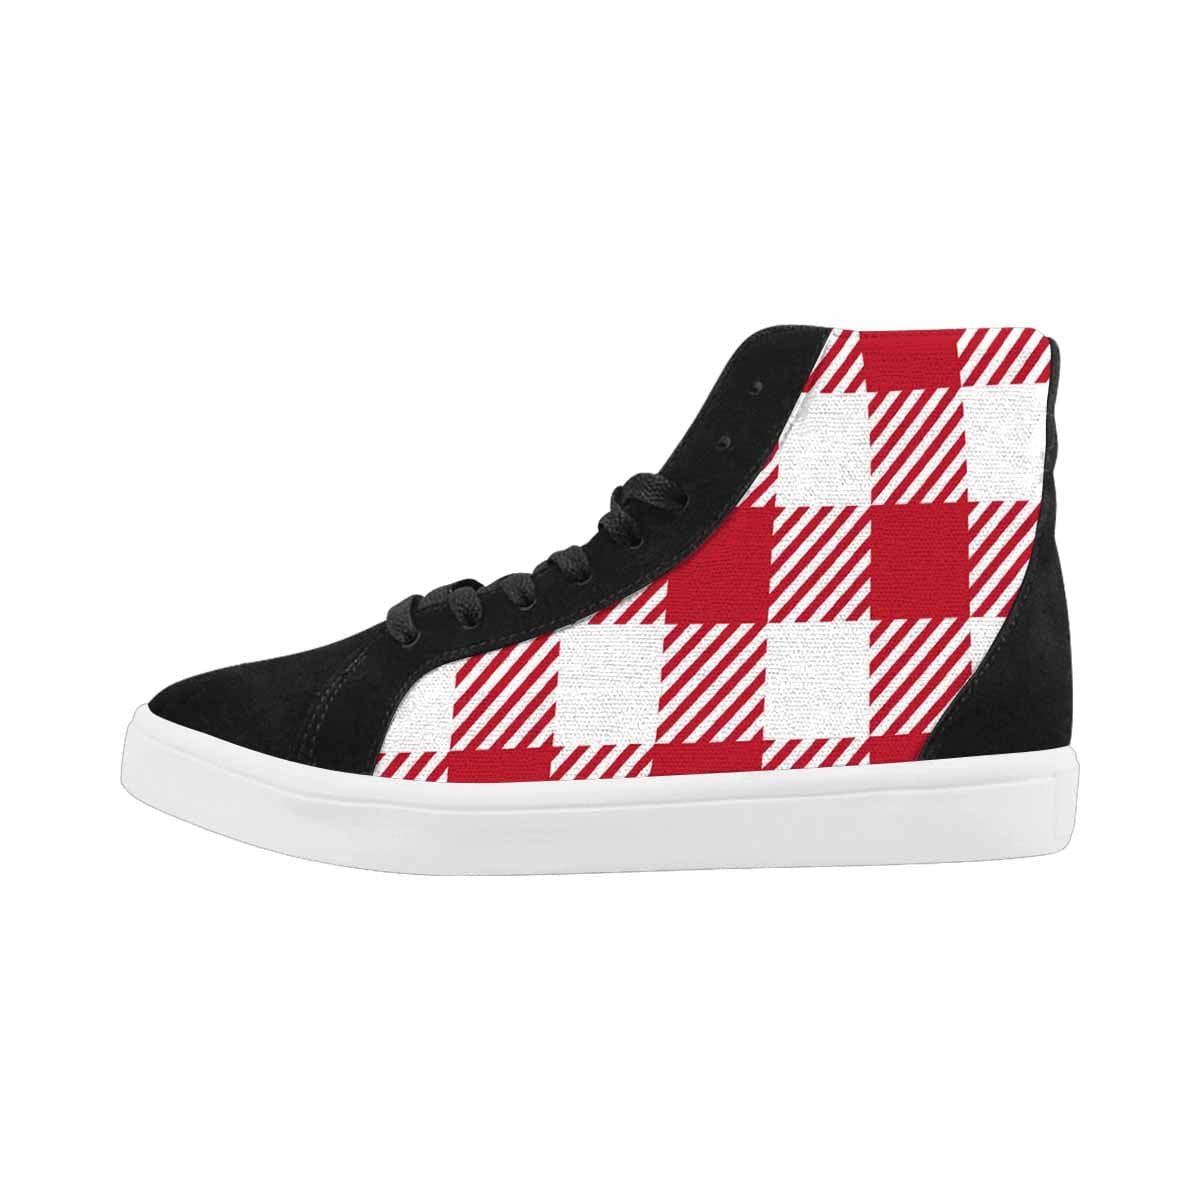 Sneakers For Women, Buffalo Plaid Red And White - High Top Sports Shoes-1